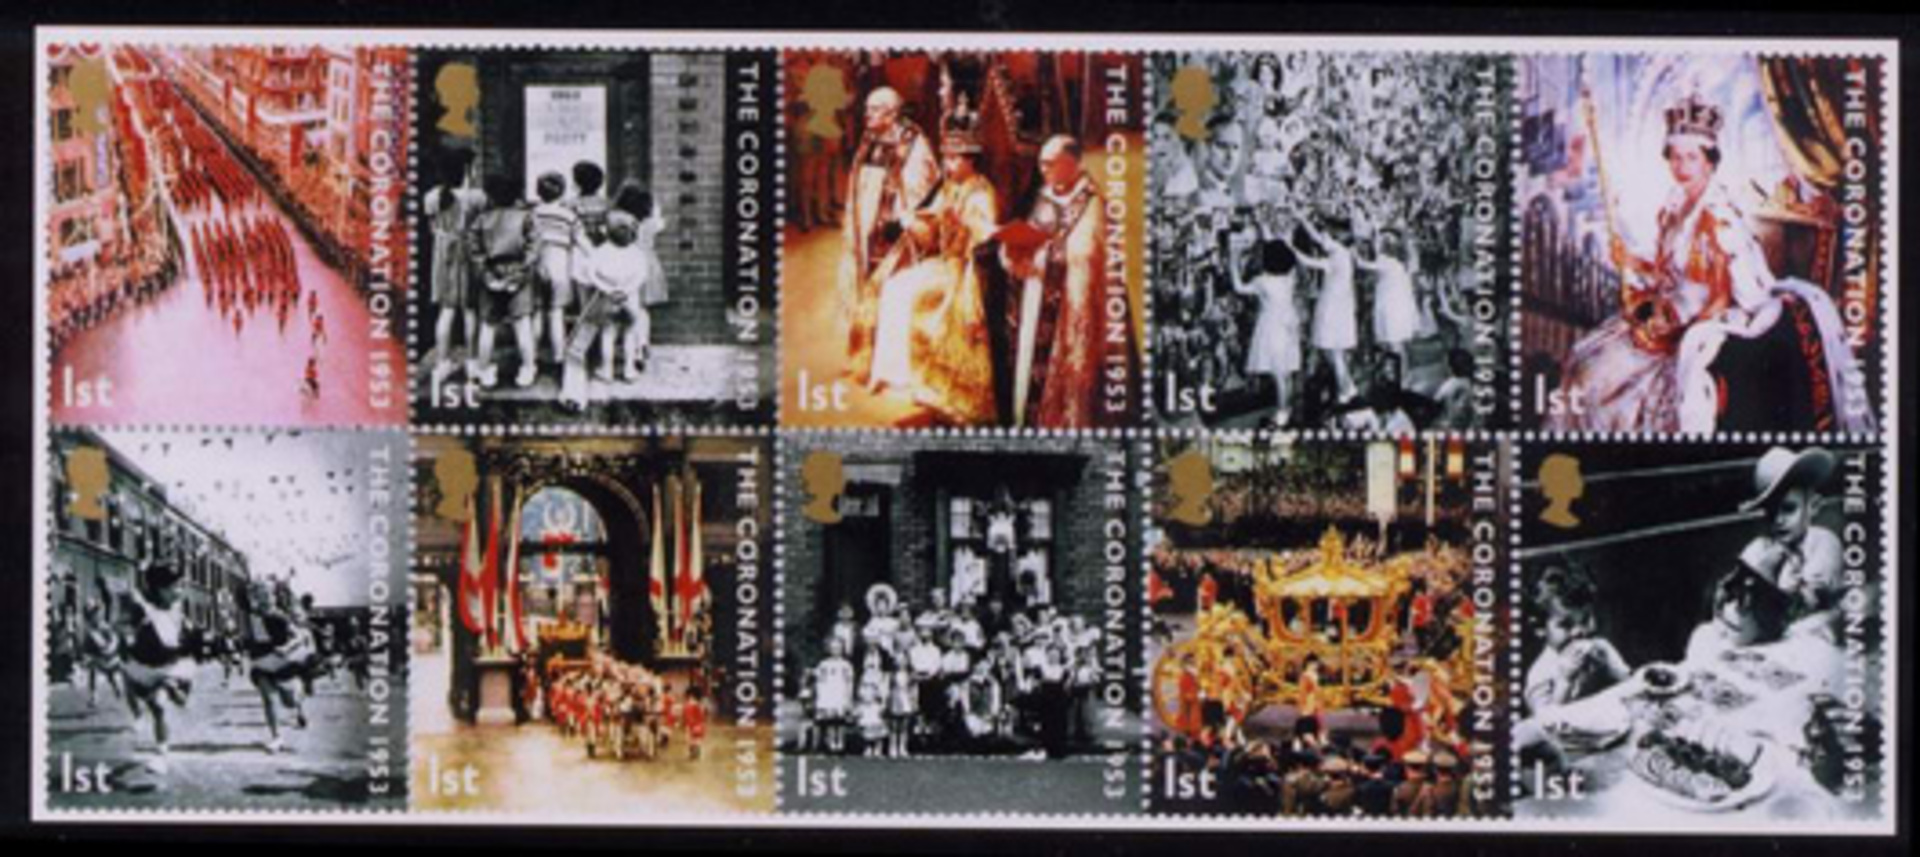 The Coronation of Her Majesty the Queen stamp collections